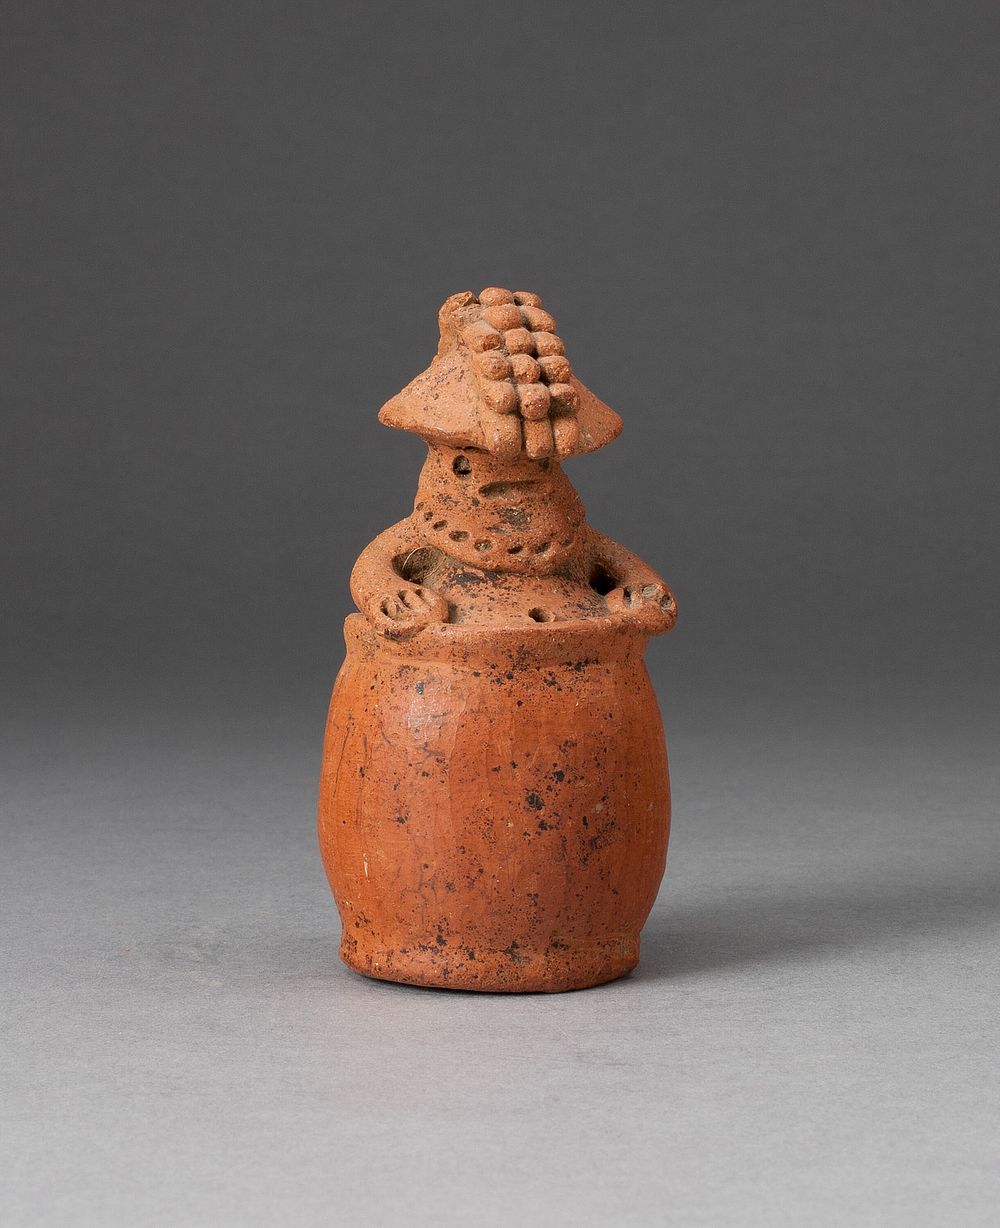 Miniature Rattle in the Form of a Figure Wearing Headdress and Mask by Guacimo